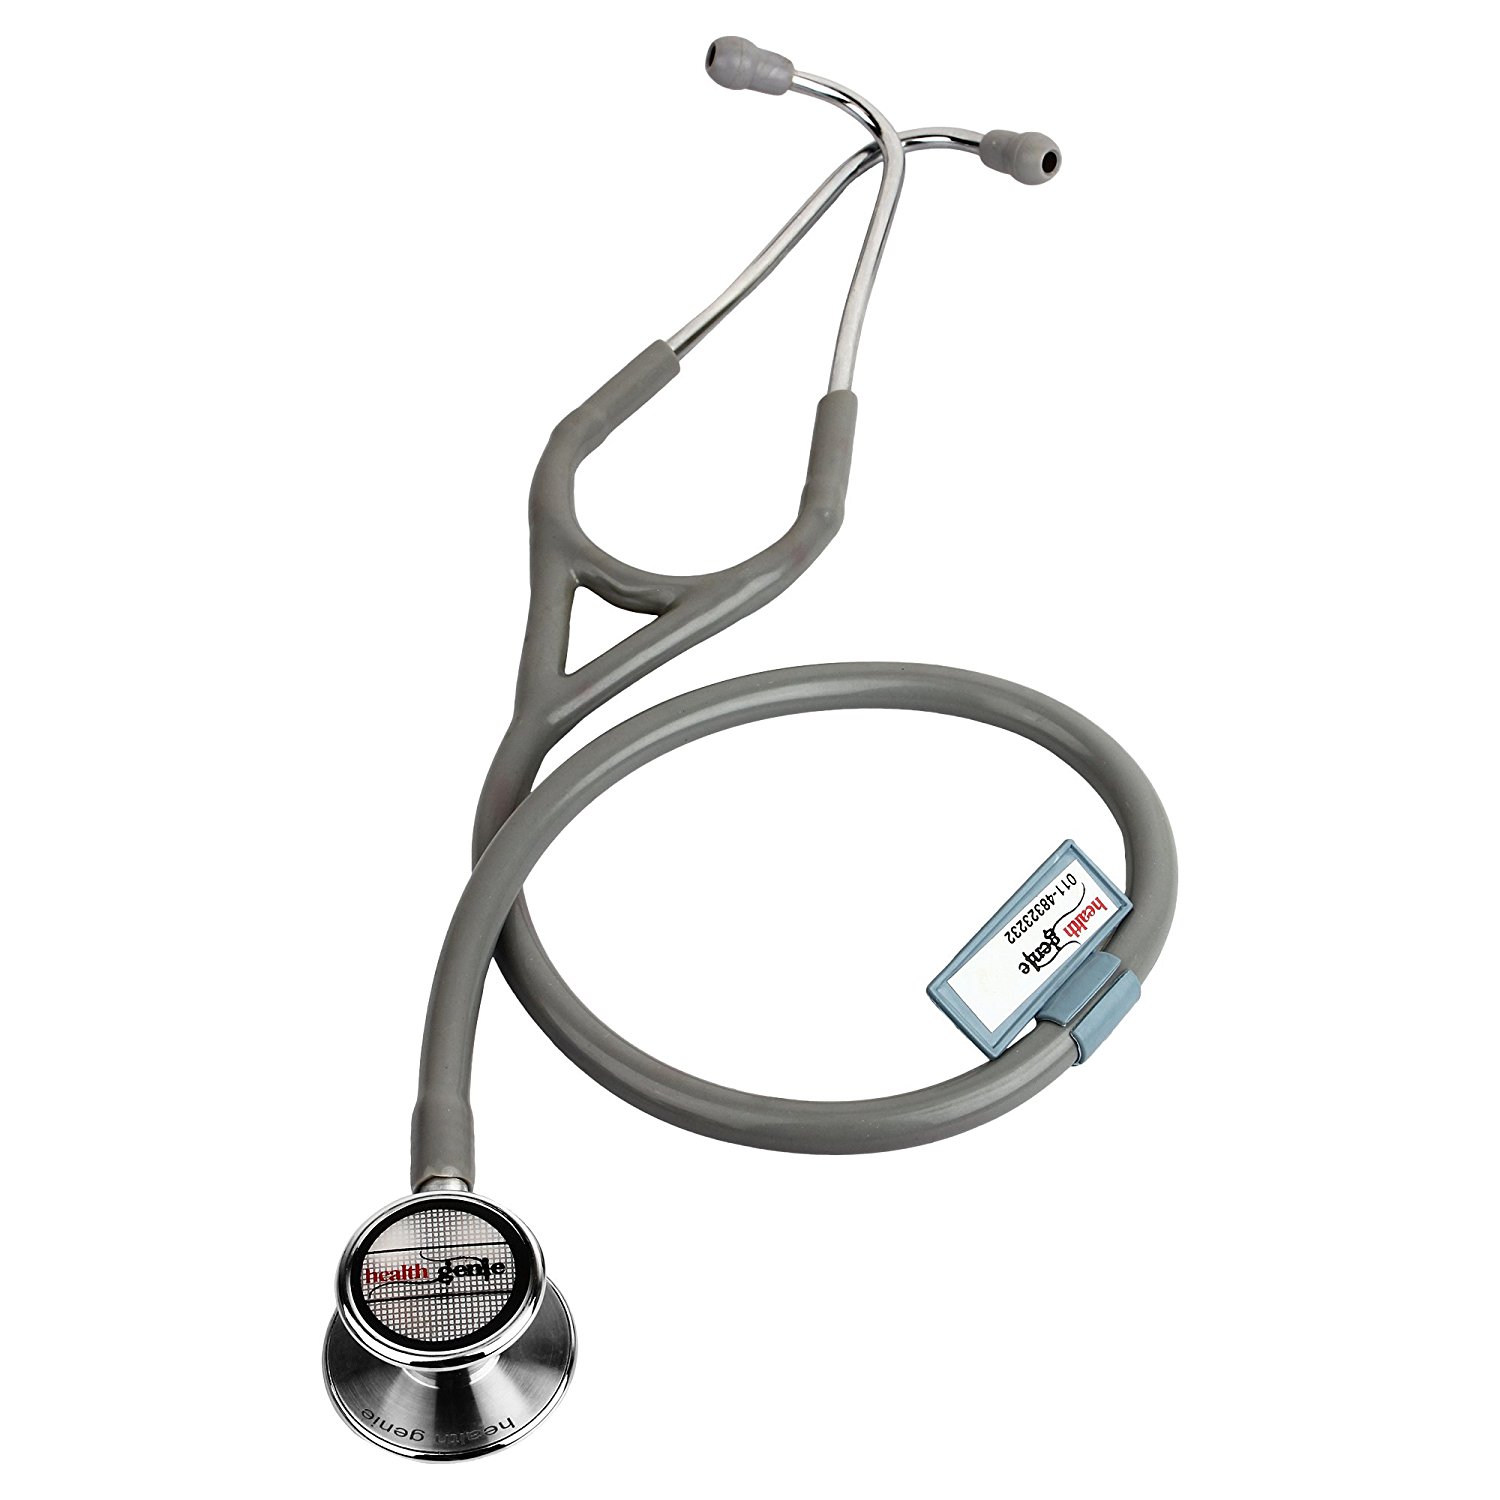 Amazon: Buy Healthgenie hG-402G Cardiology SS Stethoscope (Gray) at Rs 289 only